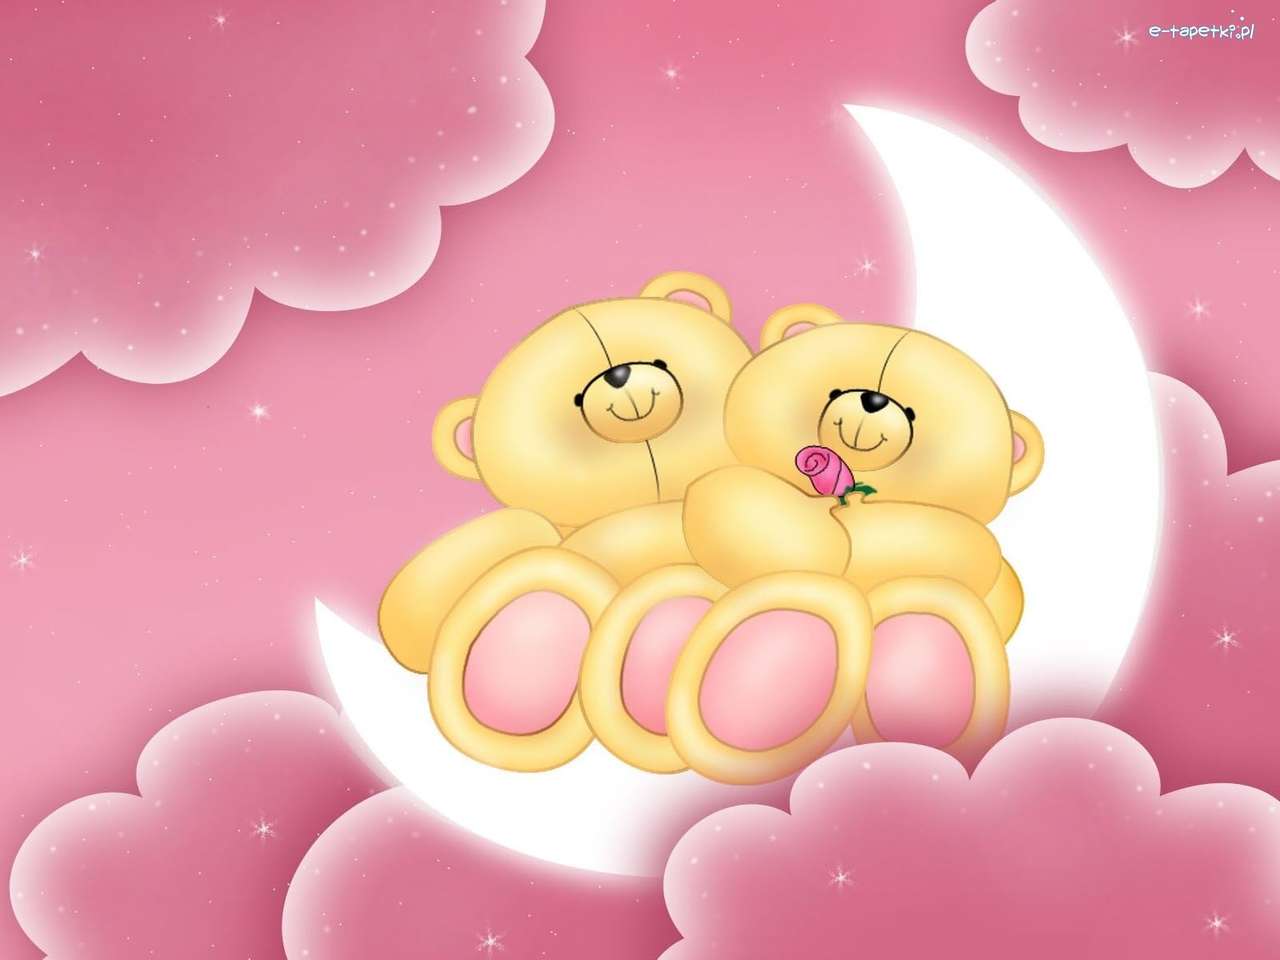 Two teddy bears, moon, clouds online puzzle